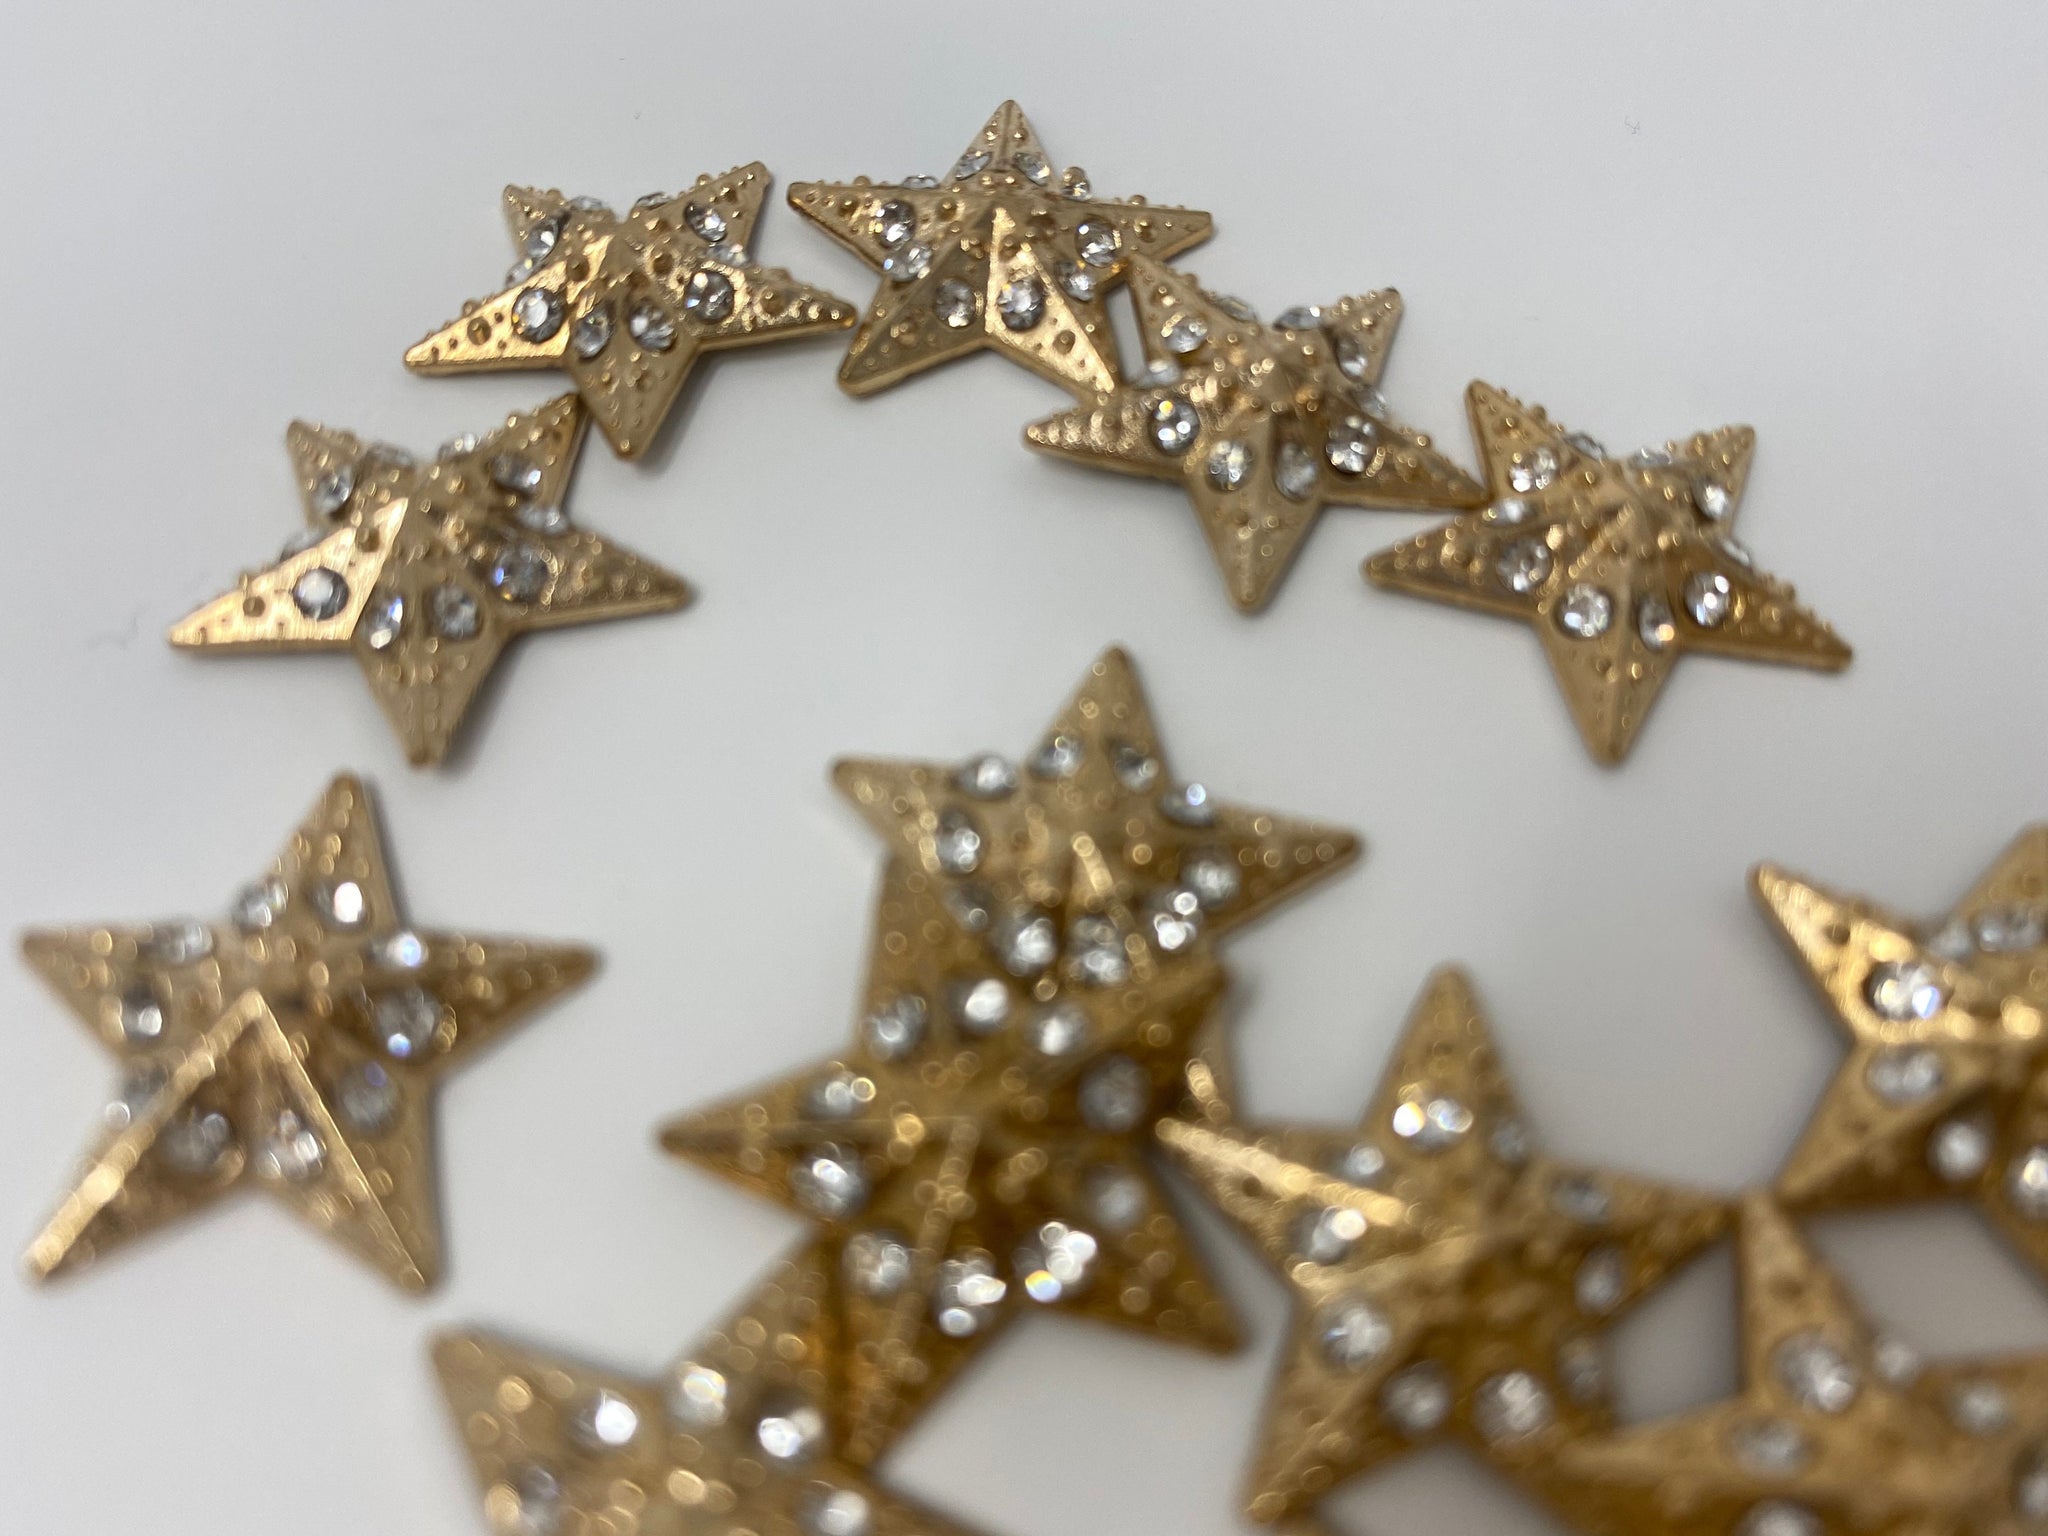 NEW, Hotfix Gold BLING Stars, 100 Pcs, 20mm, (One Size) Gold, Great for Denim, Sweaters, Camo Jackets, Belts, Bags, Shoes, Crafts,+ MORE!